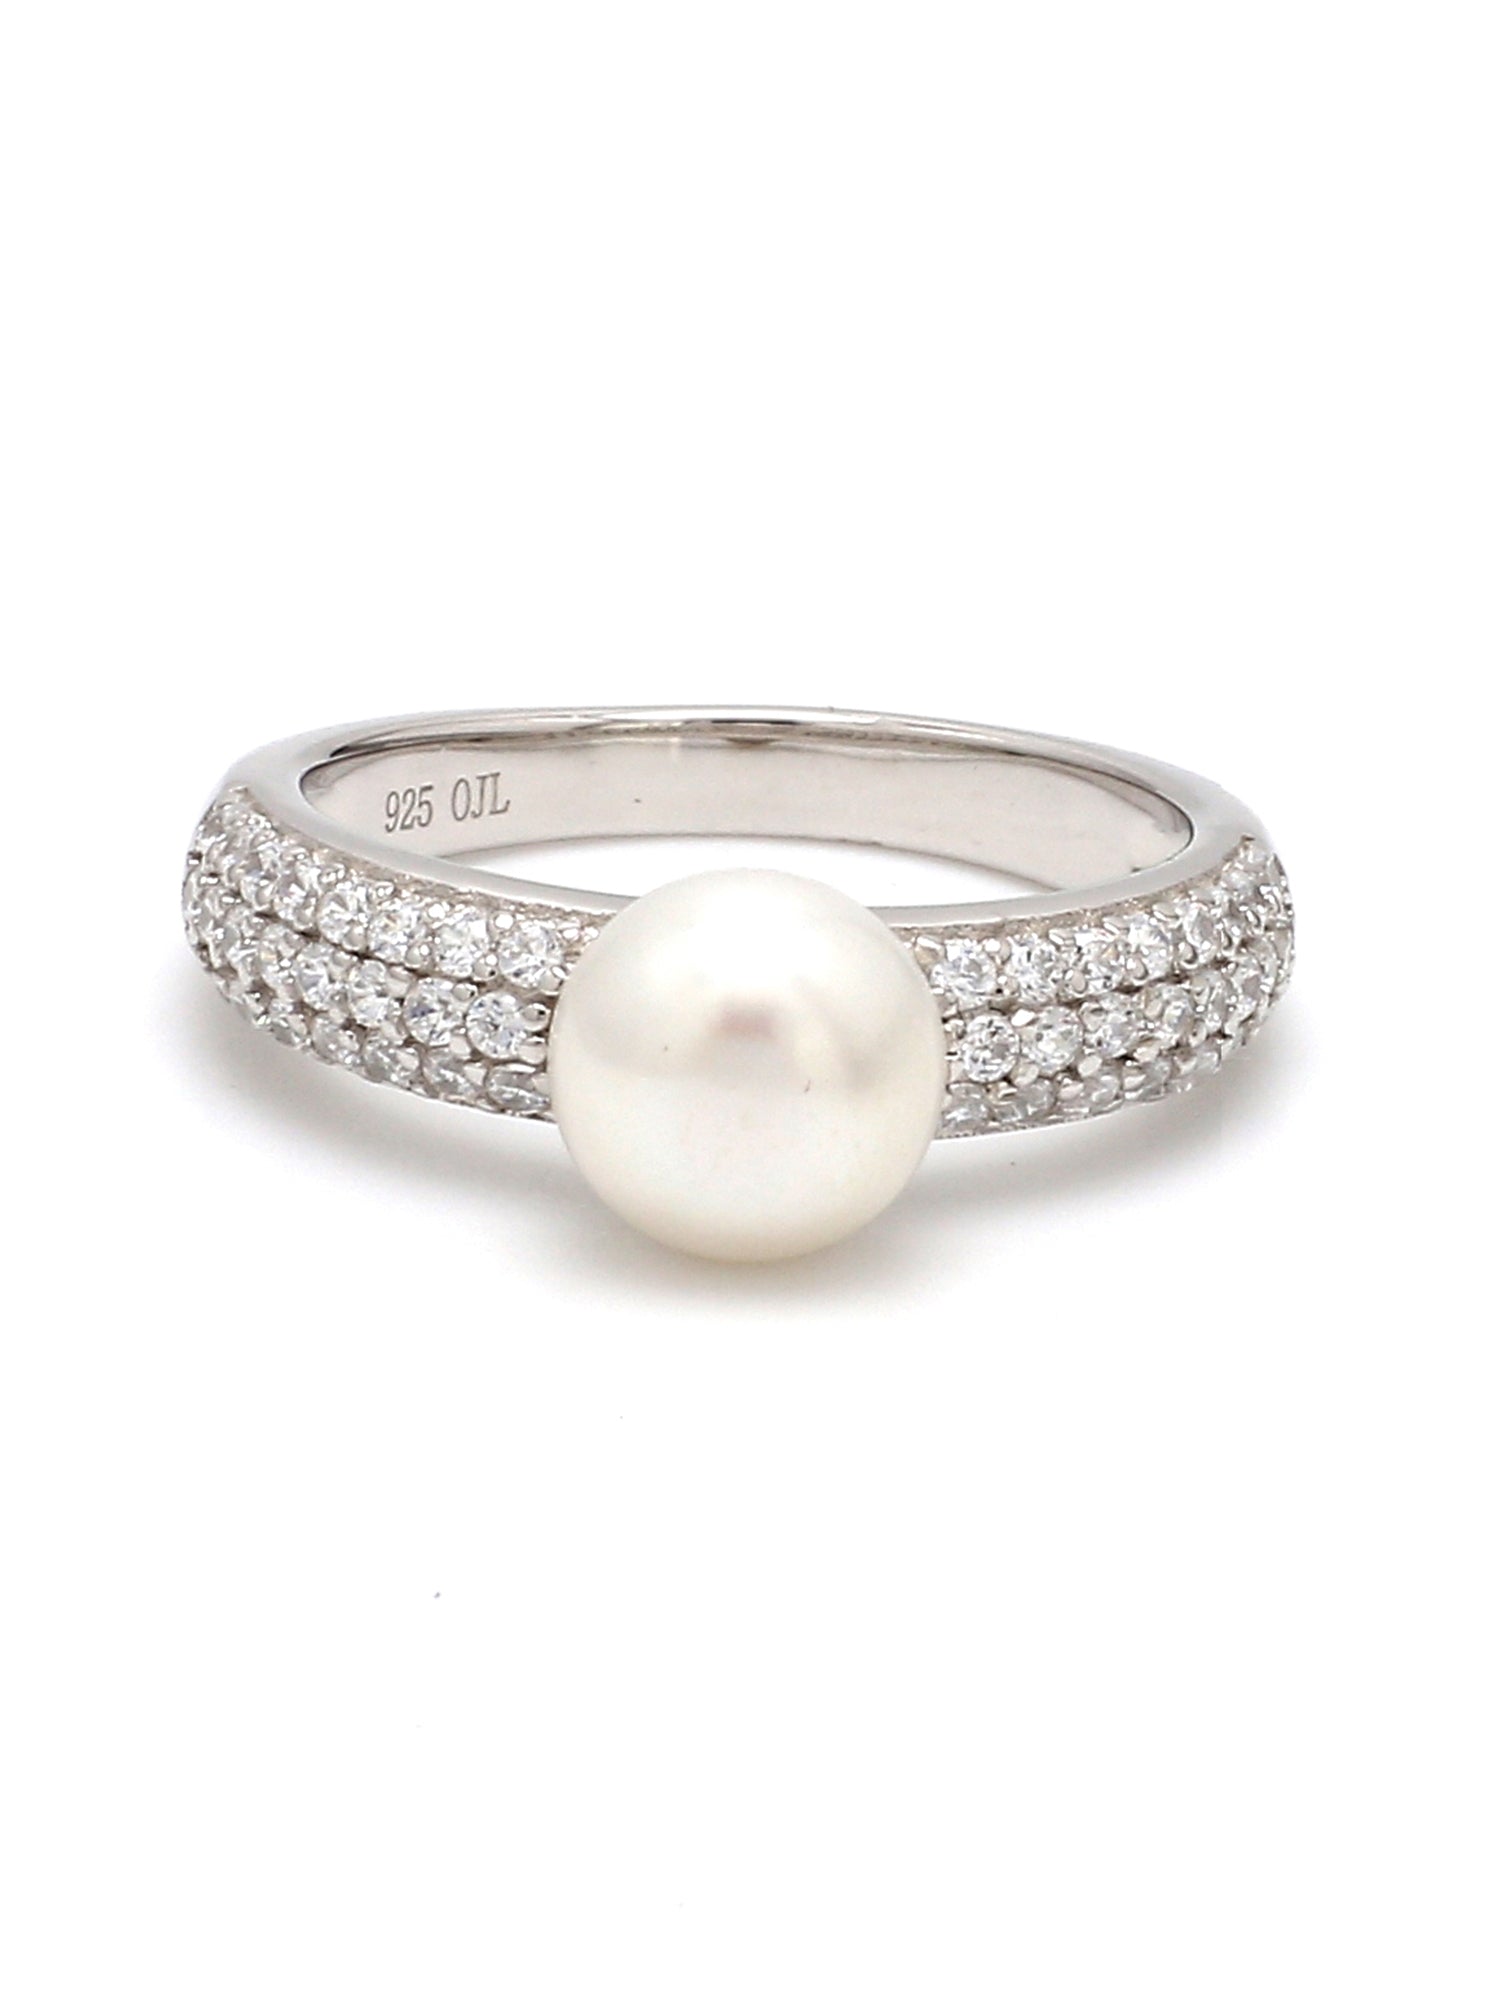 PURE PEARL SILVER RING-1